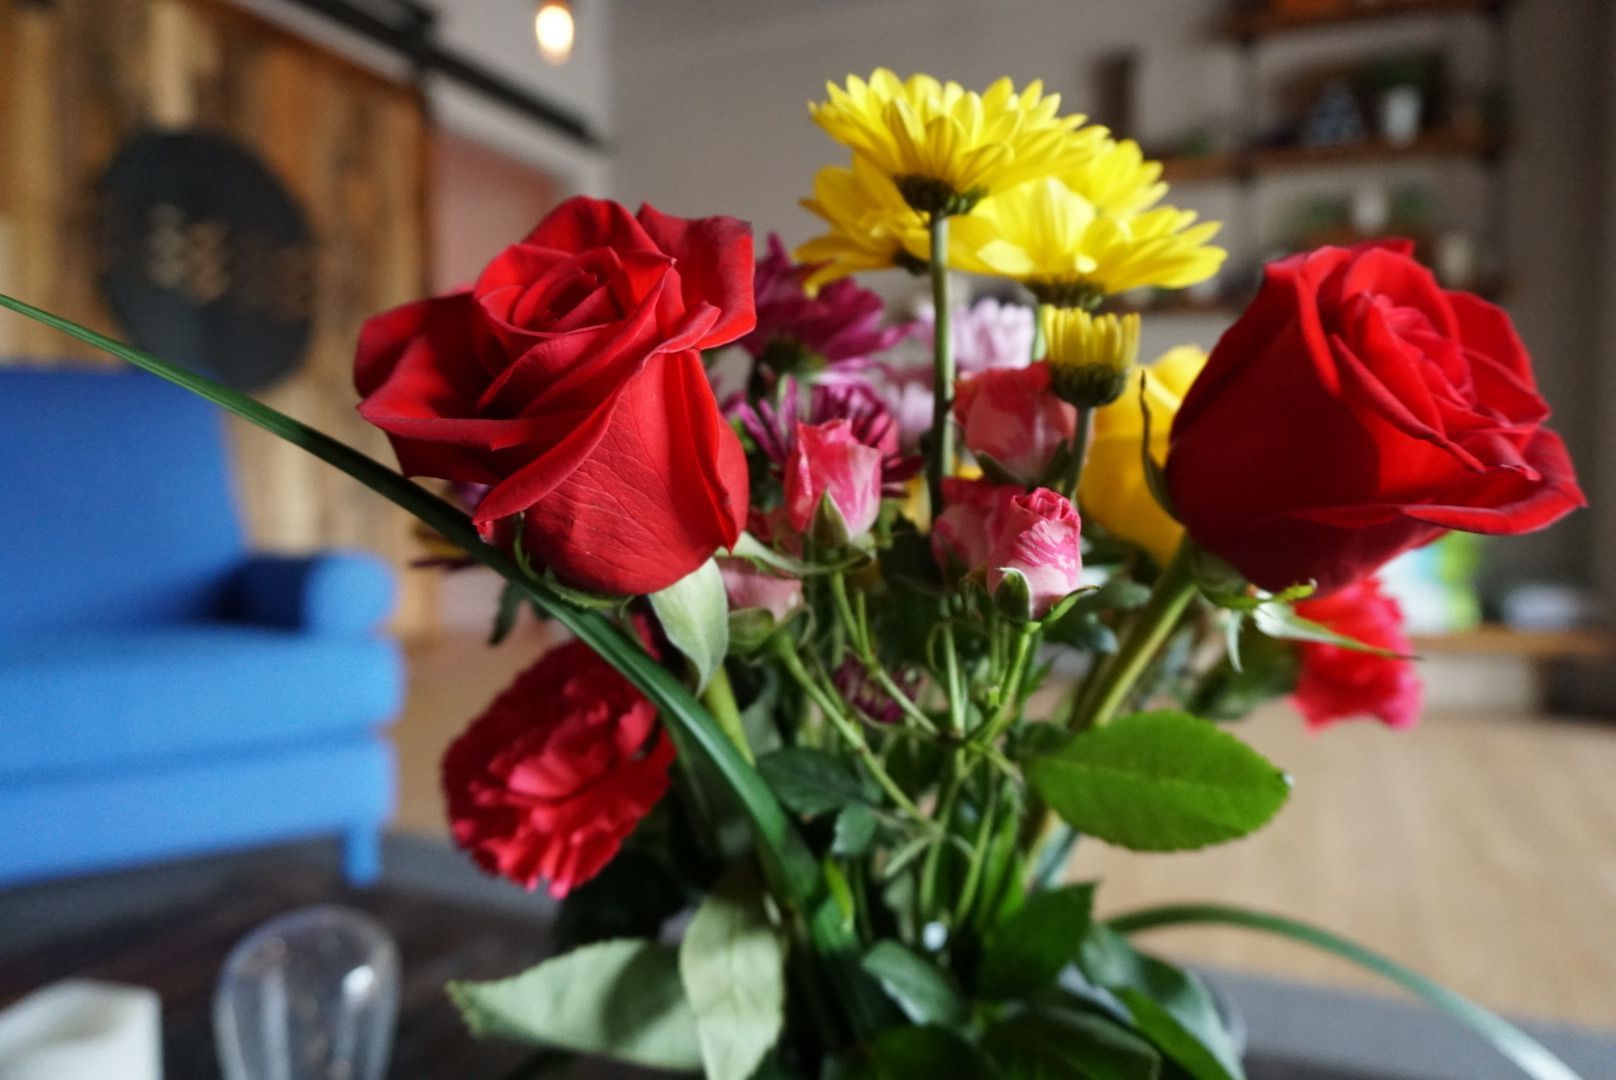 Red roses and yellow daisies in a vase on a table